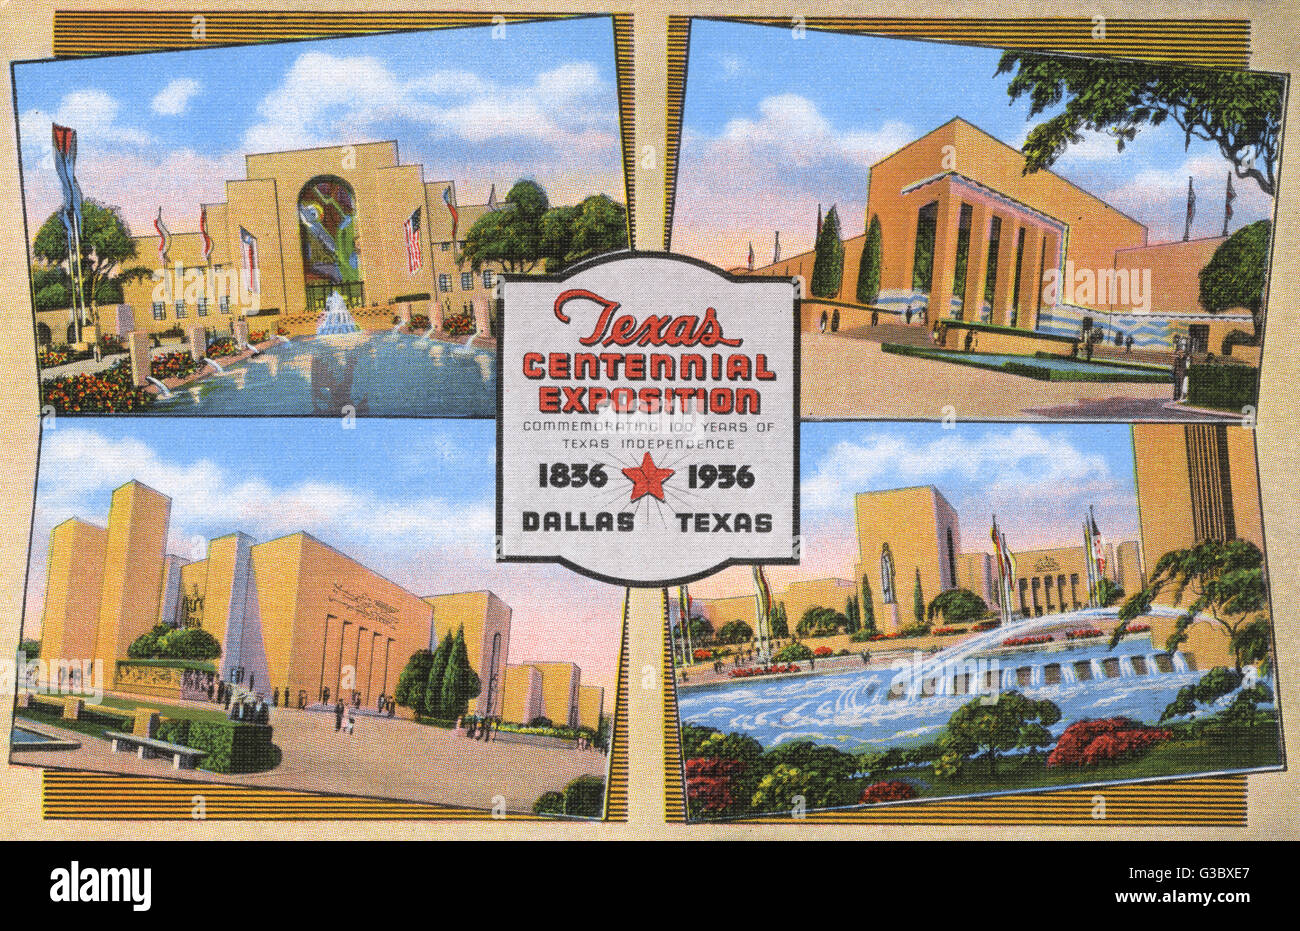 Centennial Exposition at Dallas, Texas, USA, commemorating 100 years of Texas independence, 1836-1936,  Showing four of the buildings in which exhibits were shown.      Date: 1936 Stock Photo